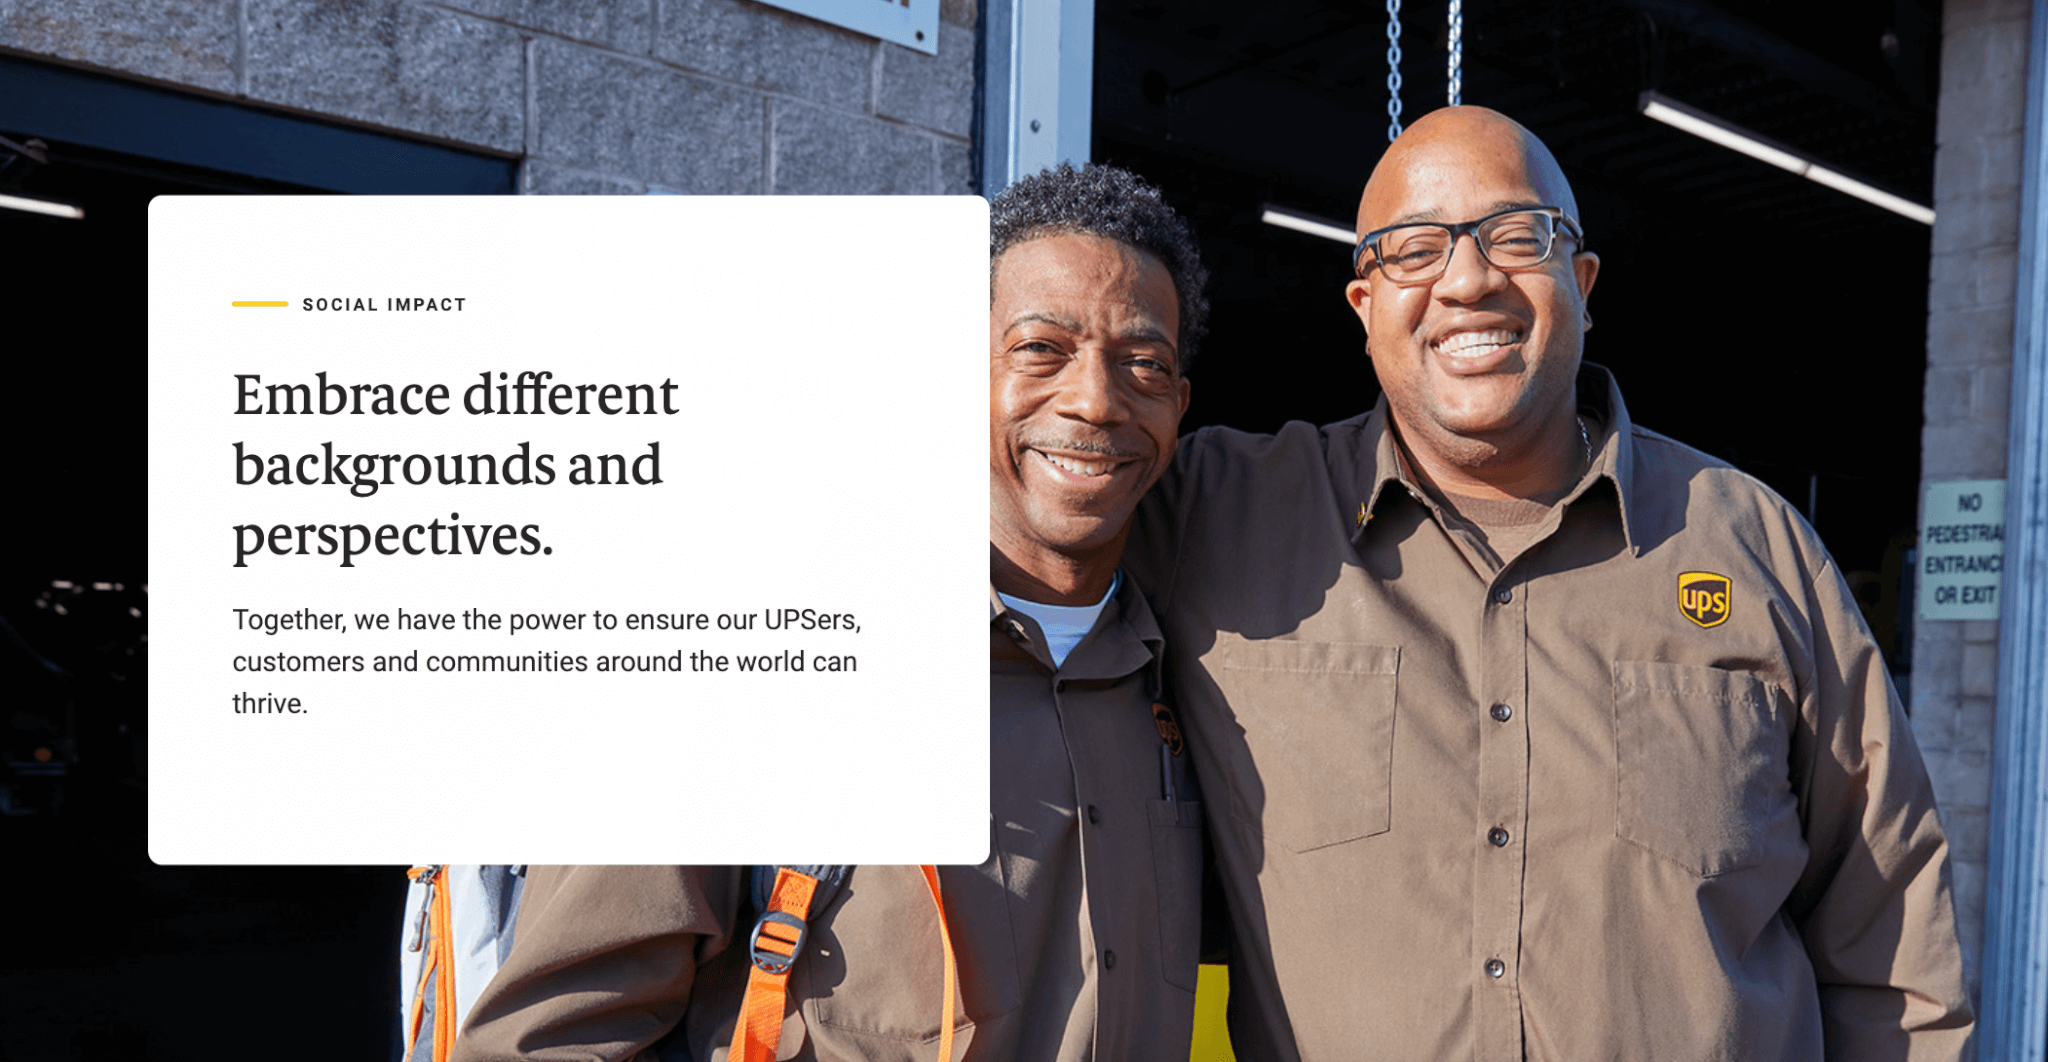 UPS Diversity, Equity & Inclusion